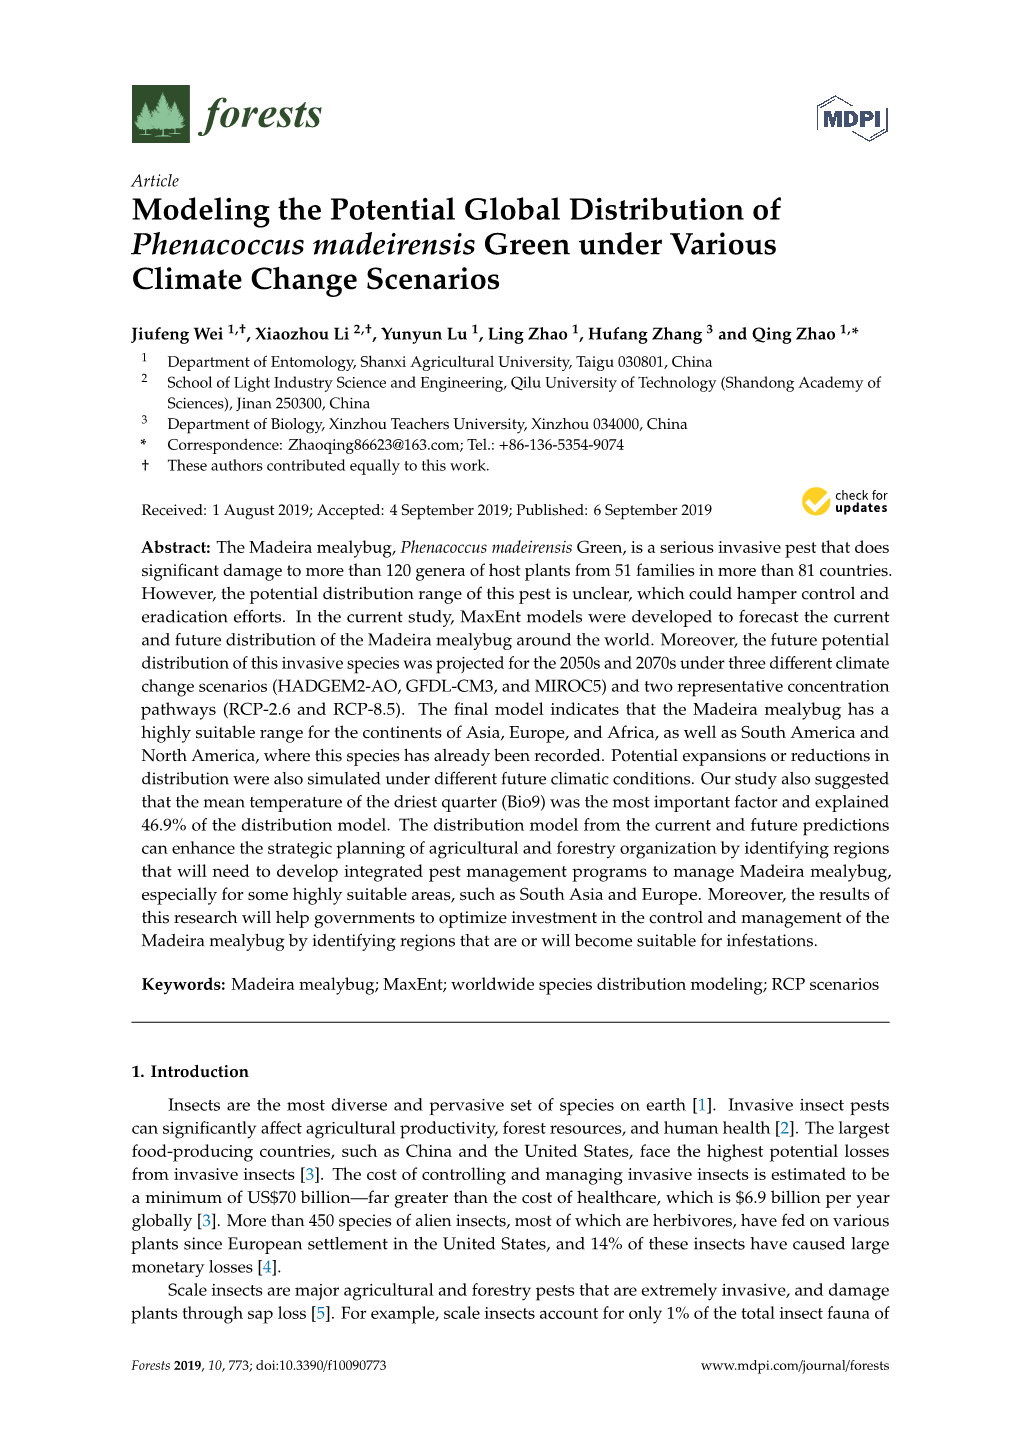 Modeling the Potential Global Distribution of Phenacoccus Madeirensis Green Under Various Climate Change Scenarios